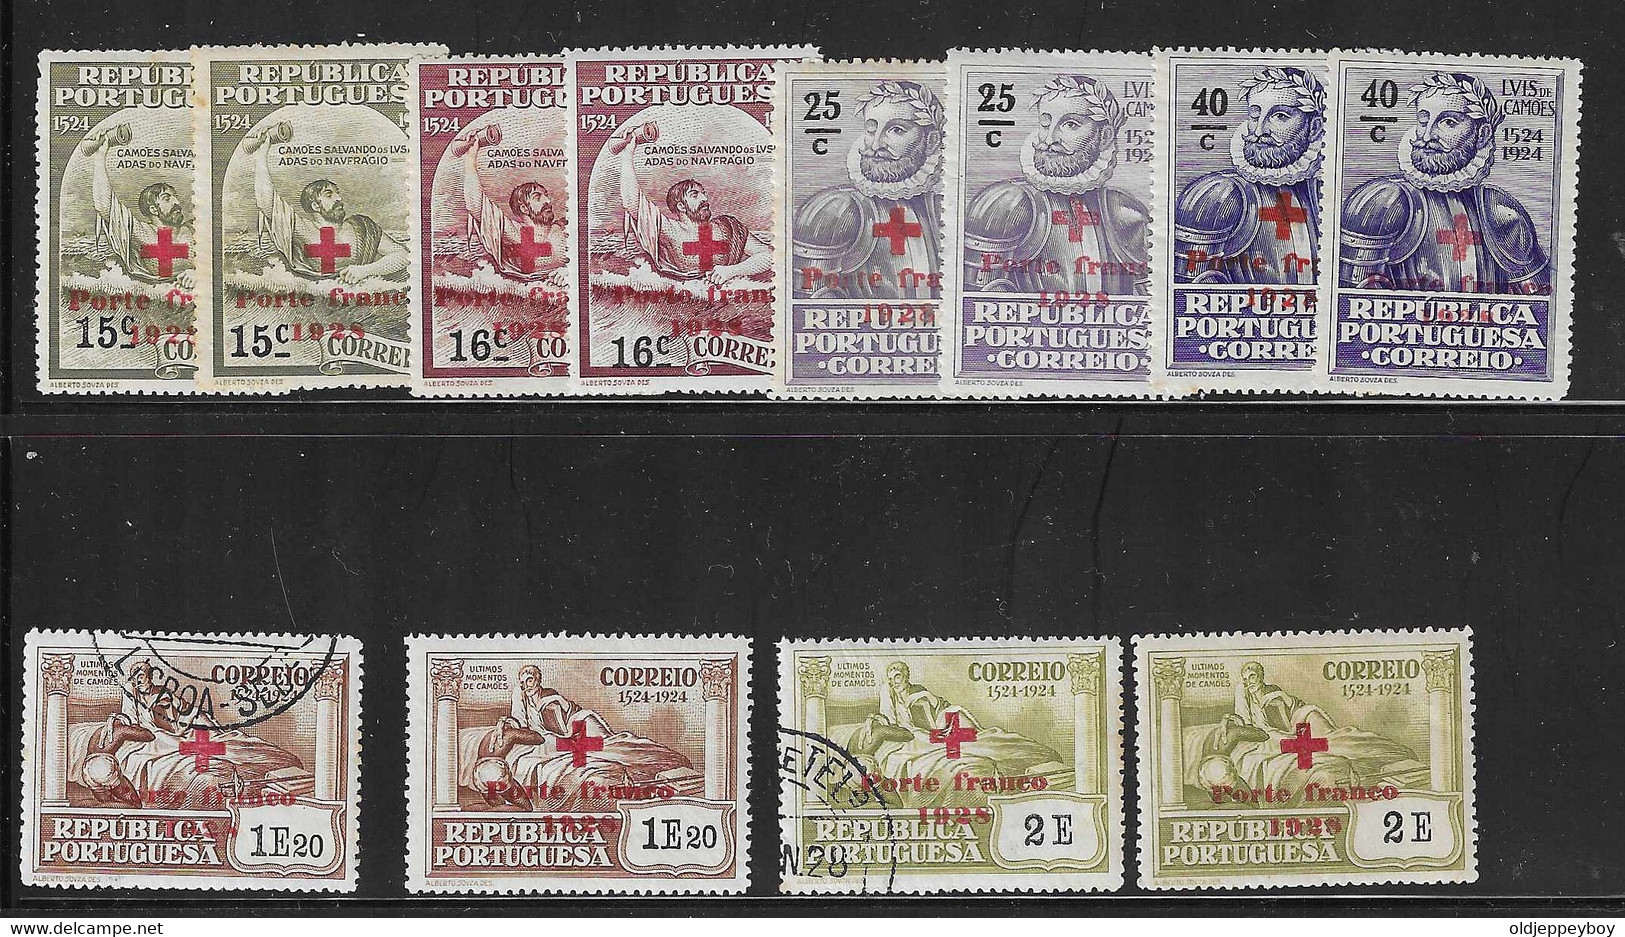 CROIX ROUGE CRUZ VERMELHA  Portugal 1928 Camoes Red Cross (Complete Set) Af. PF 11 To 16 -2 SETS MH AND USED SEE SCANS - Rode Kruis